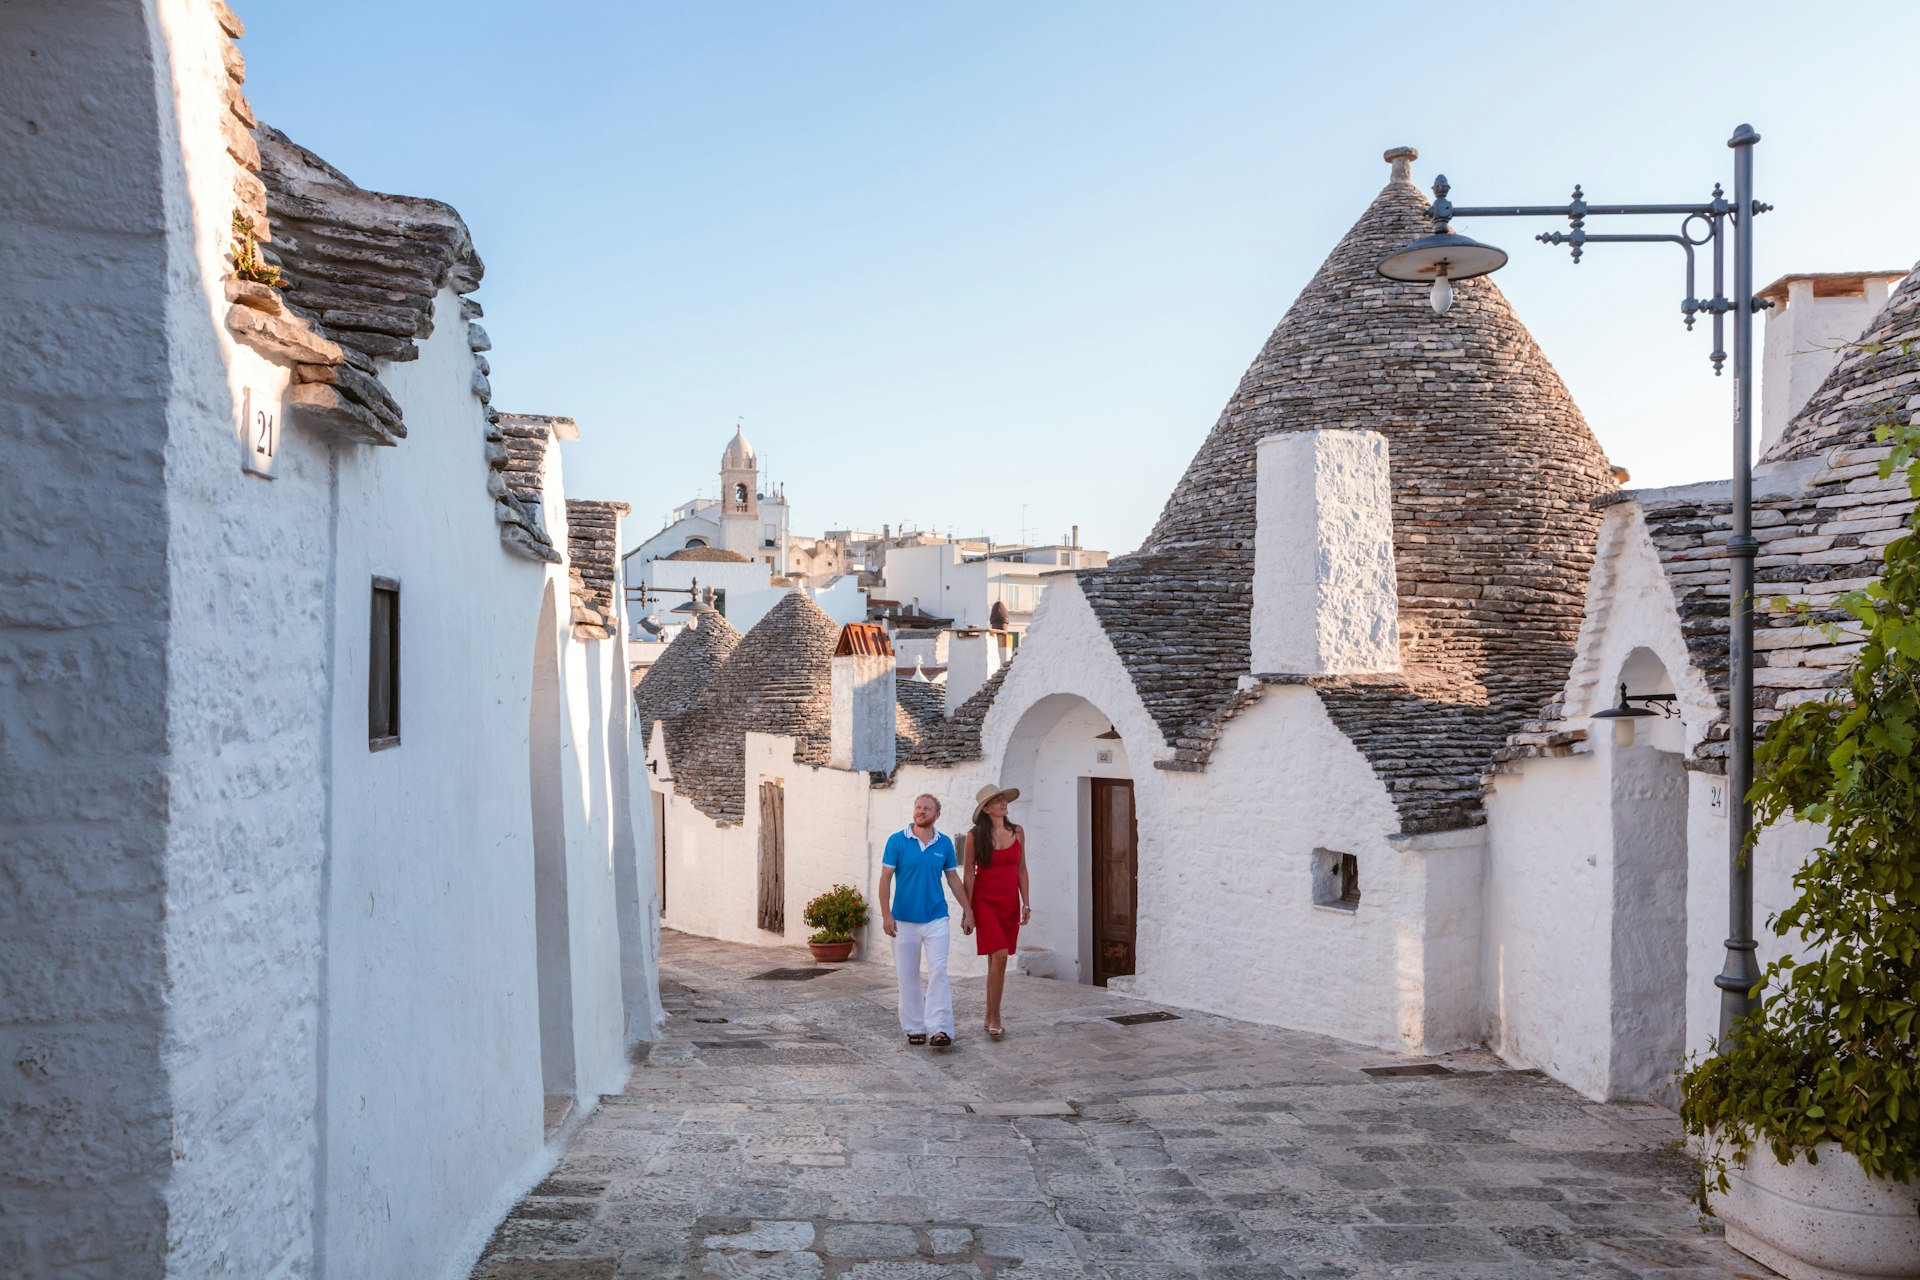 A couple walks past dome-shaped trulli houses on a street in Alberobello, Valle d’Itria, Puglia, Italy